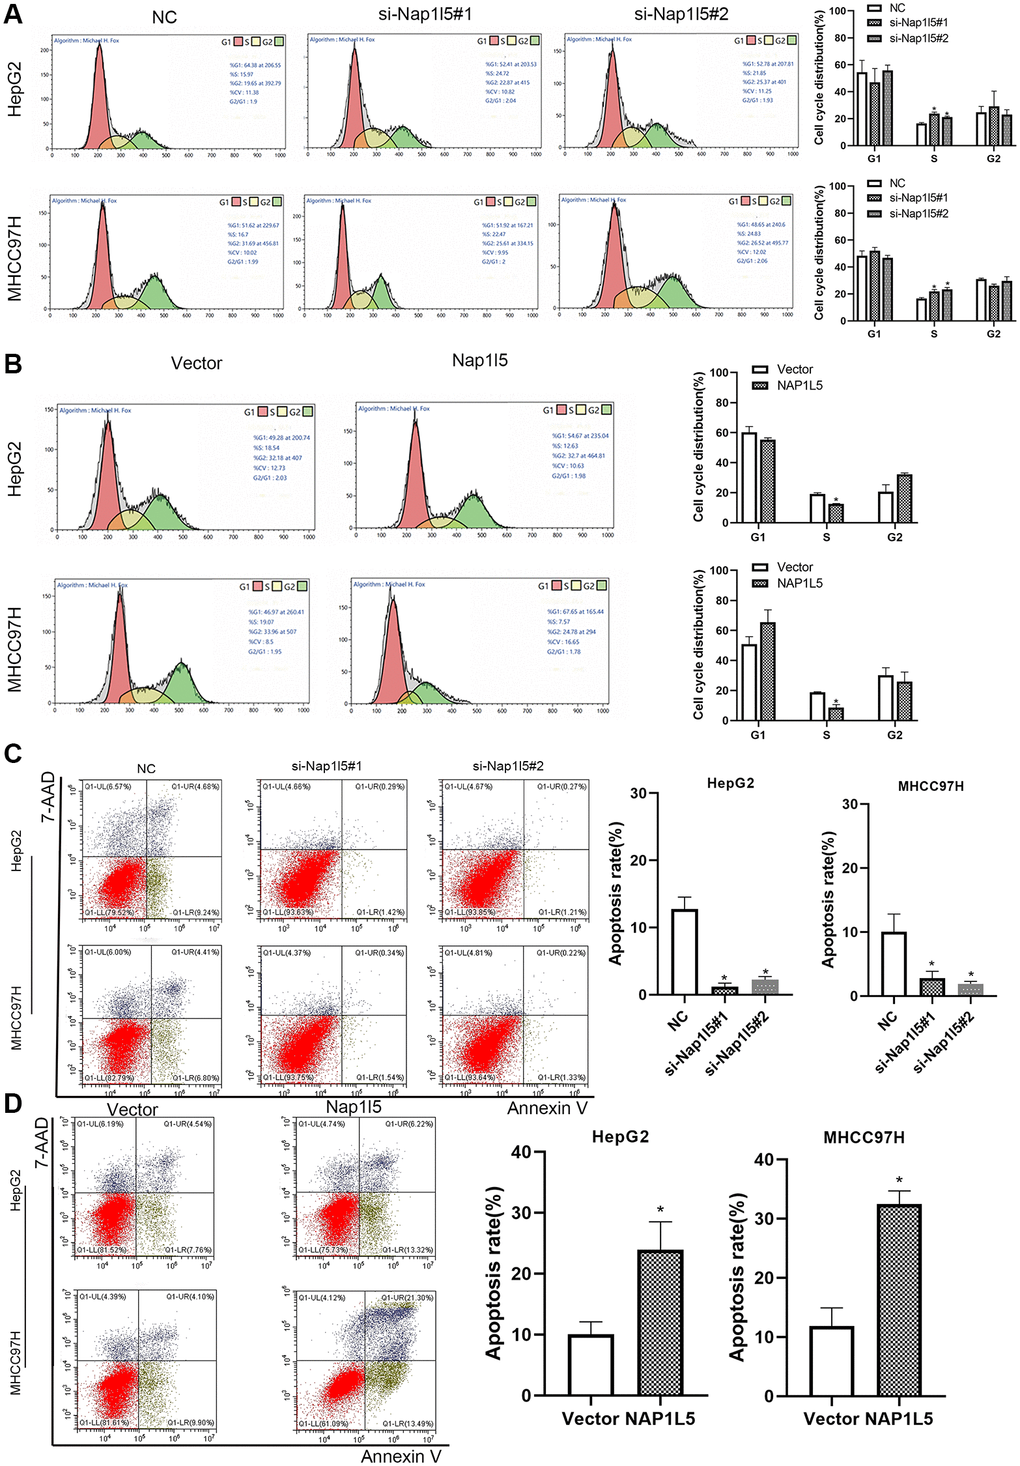 NAP1L5 induces cell cycle S phase cell reduction and promotes apoptosis in vitro. (A) The effect of NAP1L5 downregulation on the cell cycle distribution of HepG2 and MHCC97H cells. (B) The effect of NAP1L5 overexpression on the cell cycle distribution of HepG2 and MHCC97H cells. (C) The effect of the downregulation of NAP1L5 on the apoptosis of HepG2 and MHCC97H cells. (D) The effect of NAP1L5 overexpression on HepG2 and MHCC97H cell apoptosis. *p **p ***p 